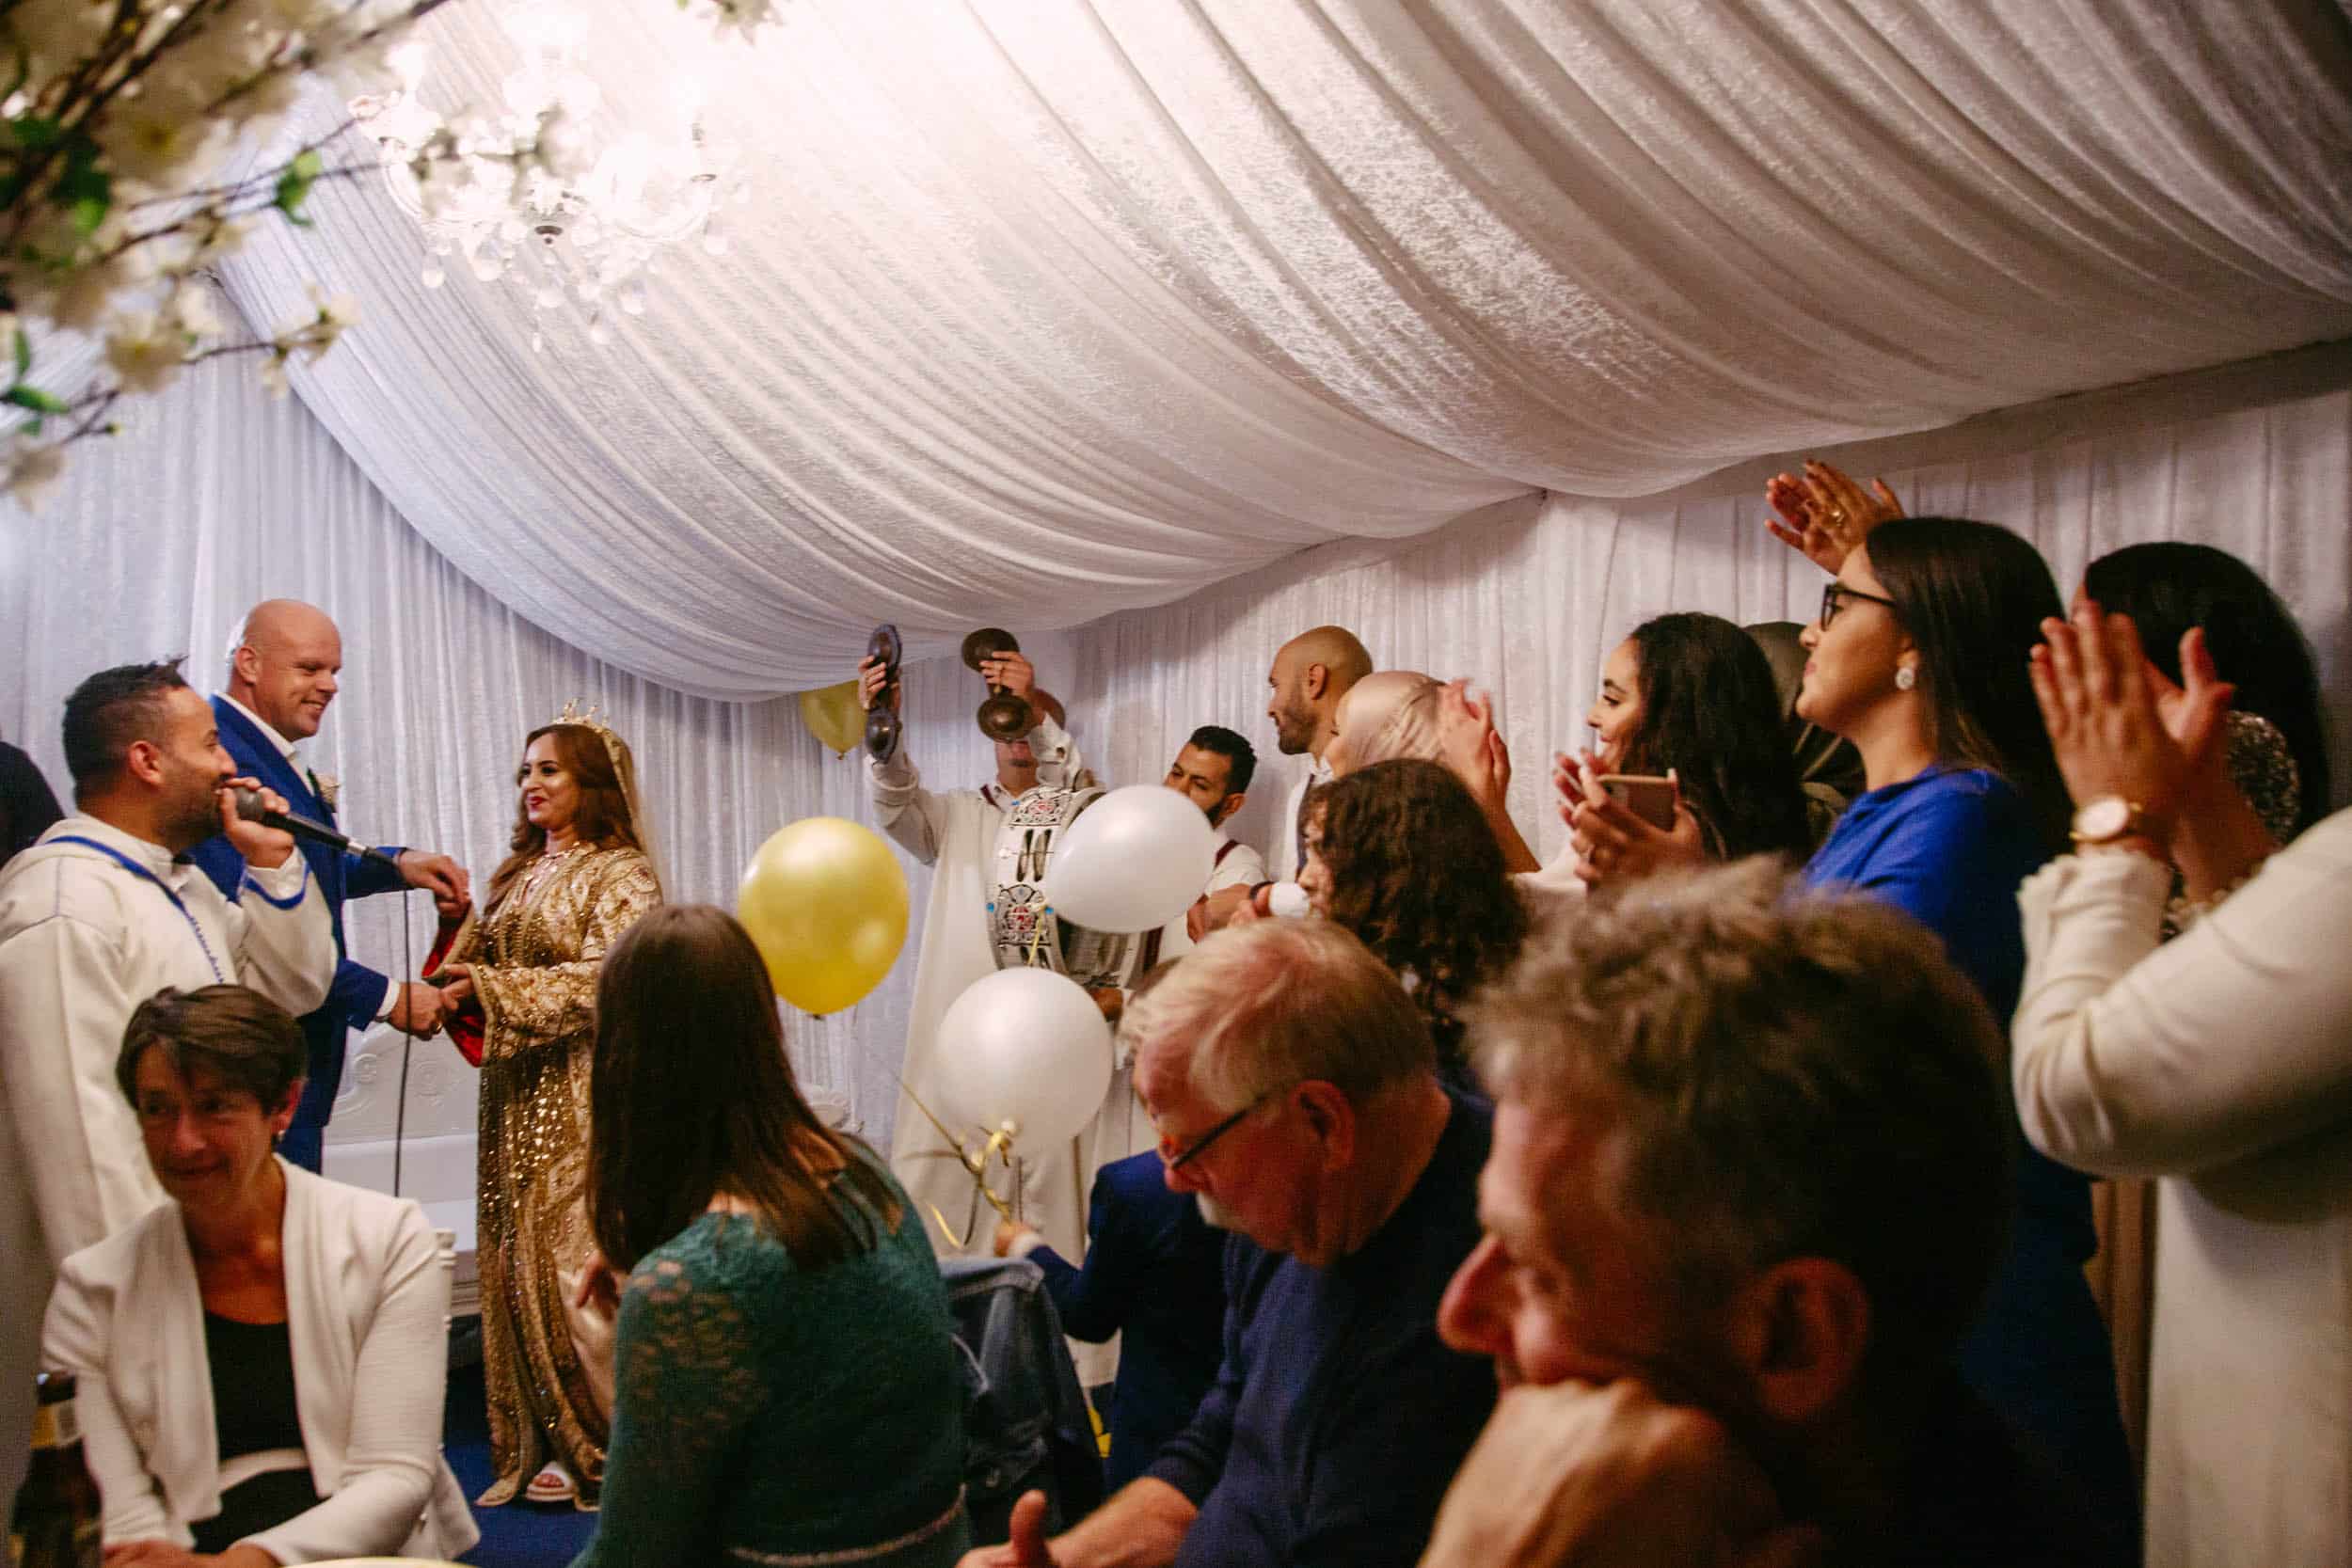 Description : A wedding ceremony in a tent with people applauding in the wedding theme.